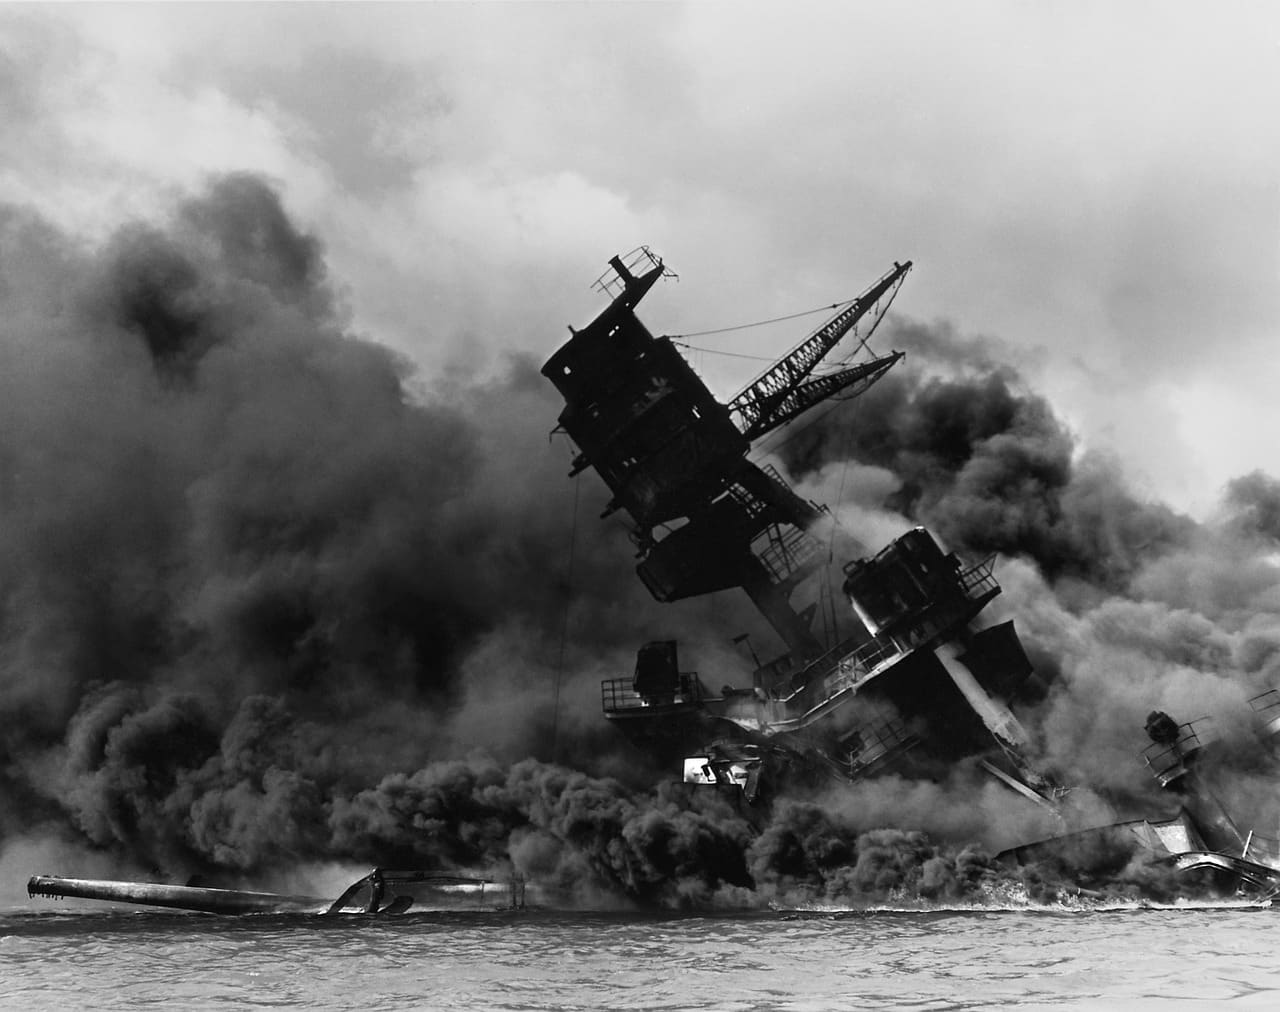 What started world war II? - Attack on Pearl Harbor